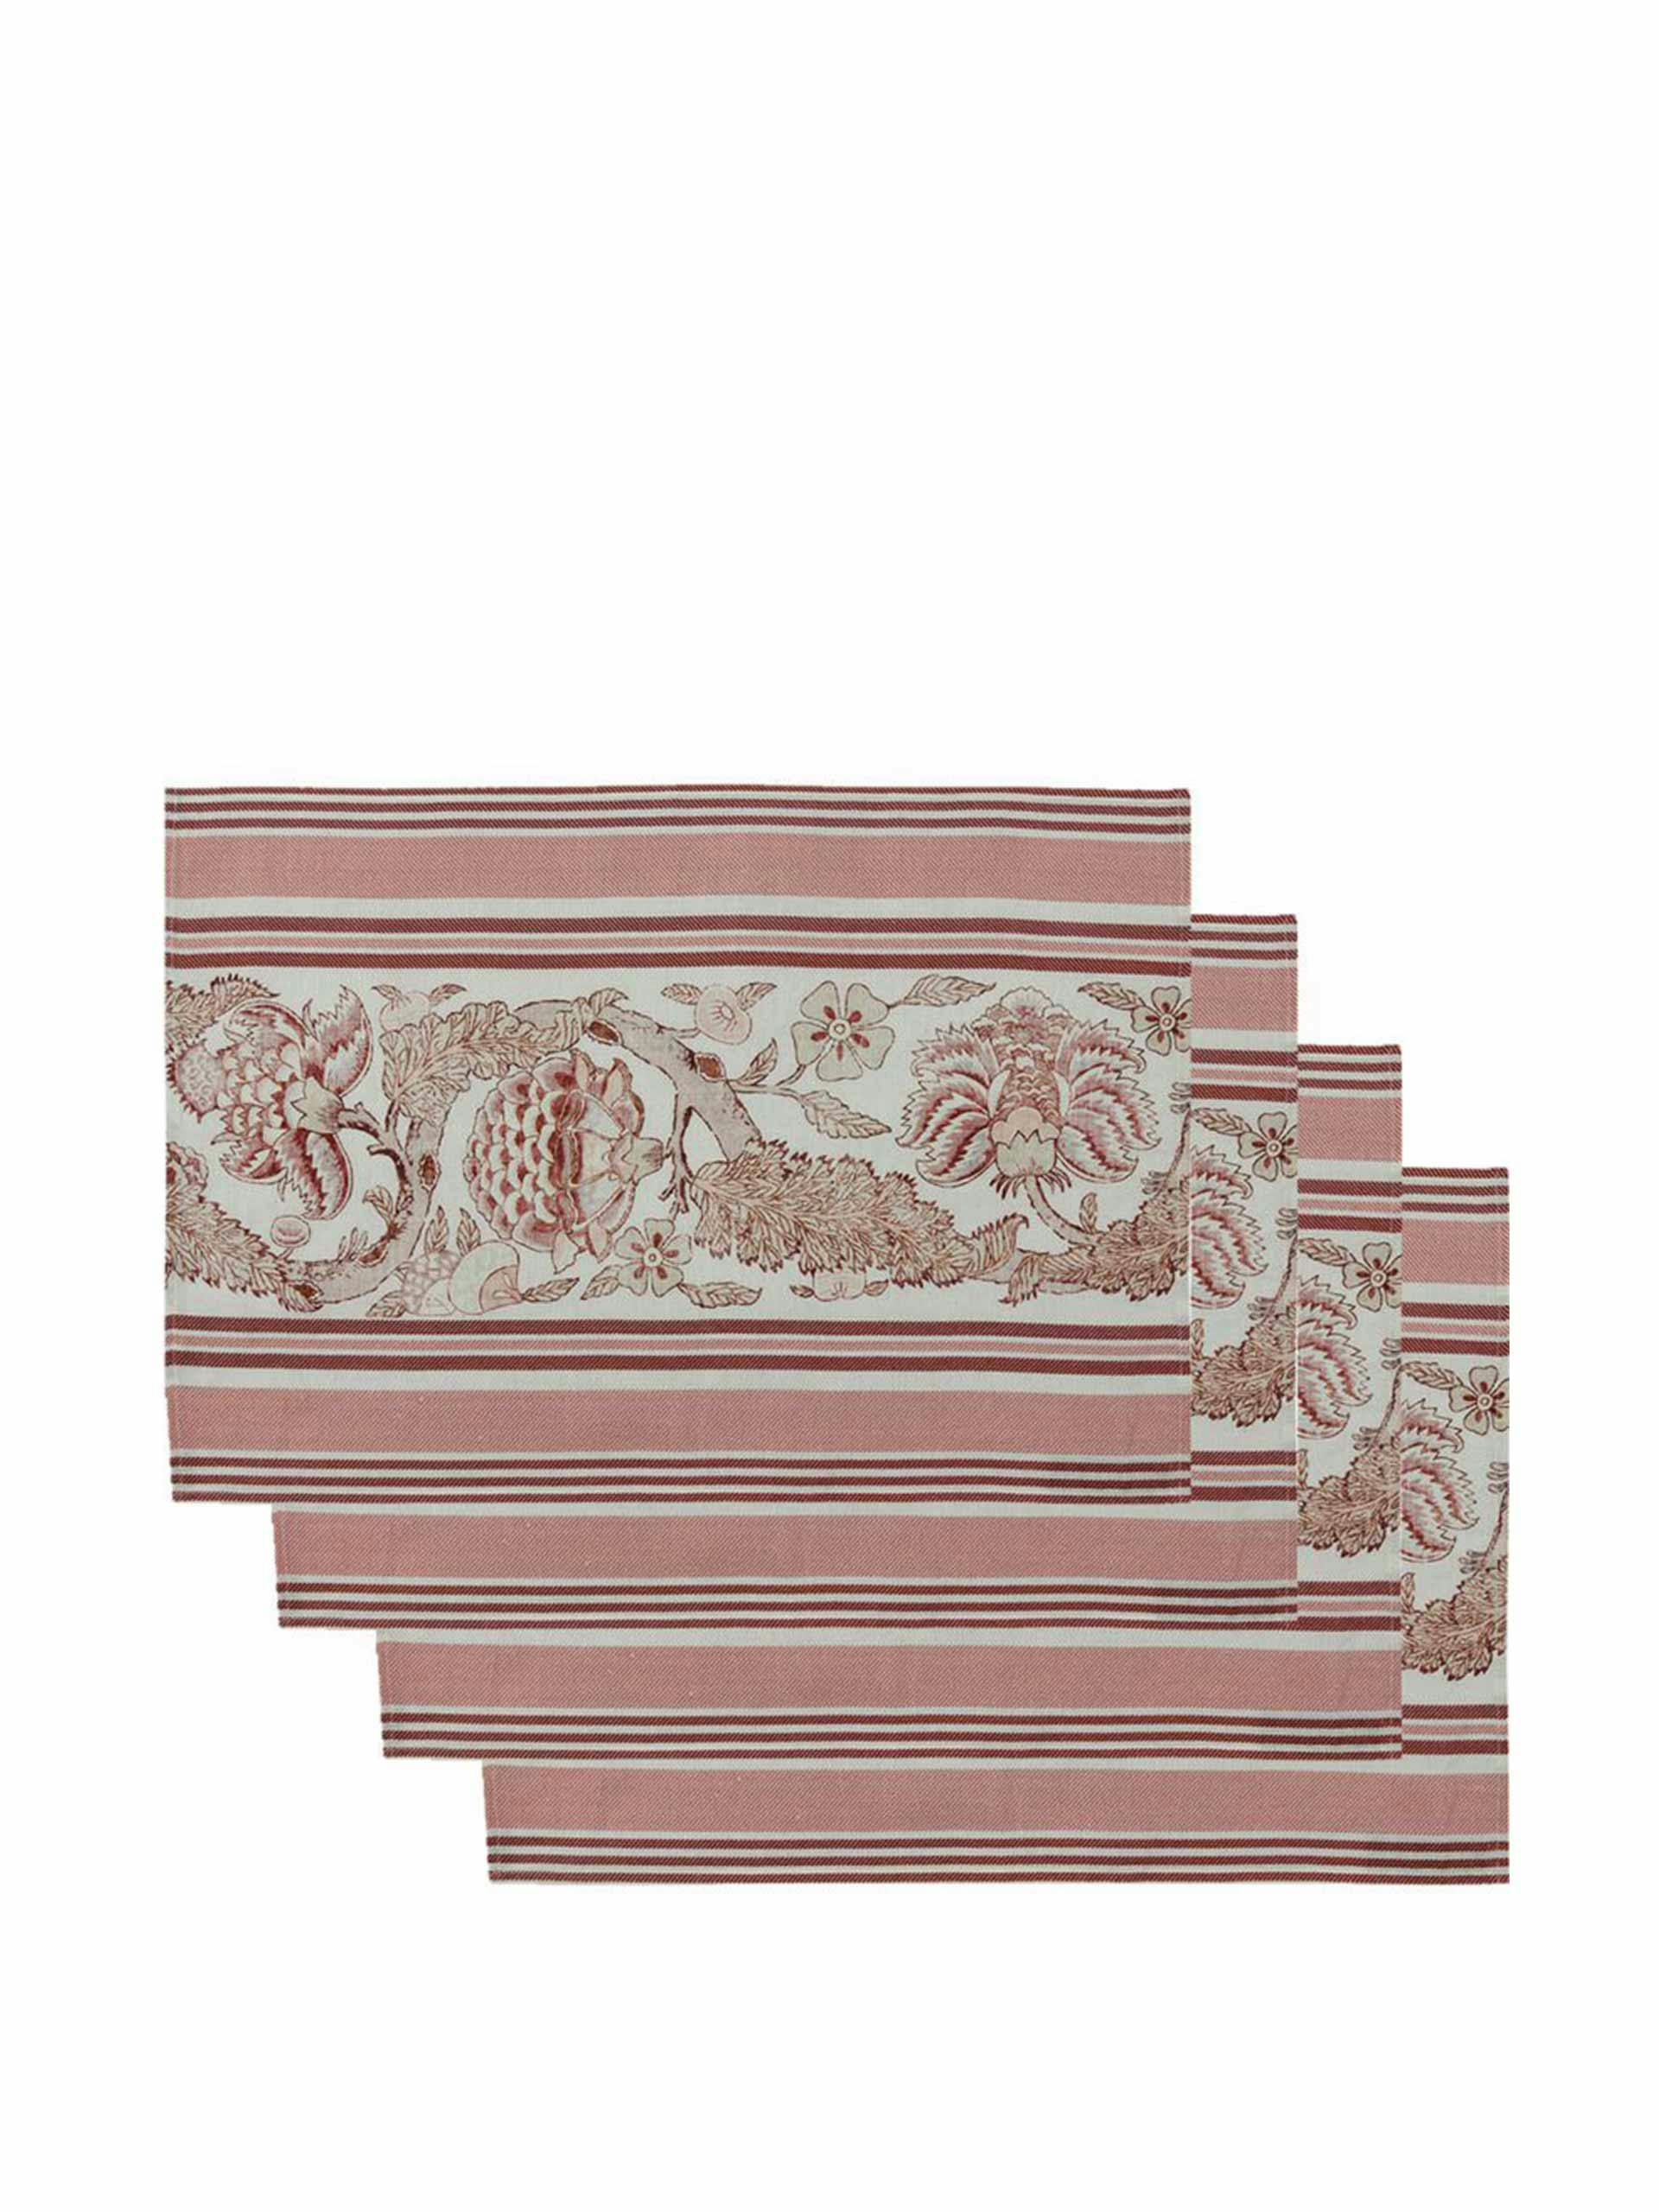 Striped floral placemats set of 4